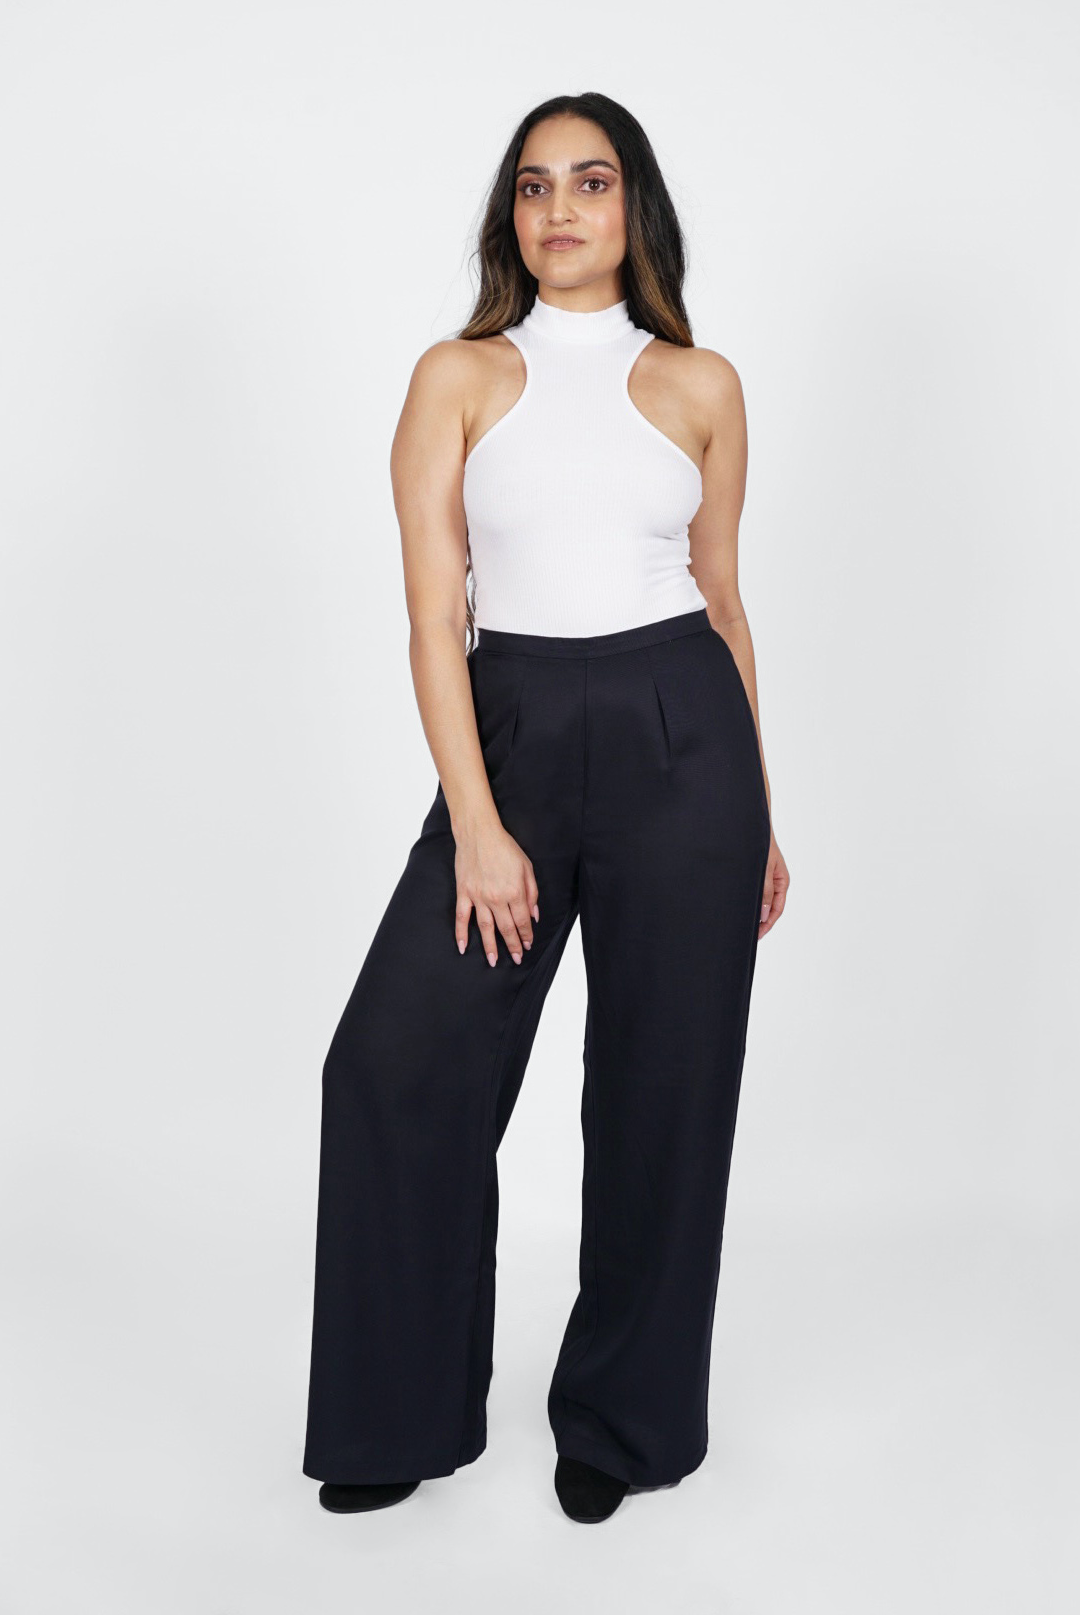 Styling the New Everlane Wide Leg Pants - Jeans and a Teacup